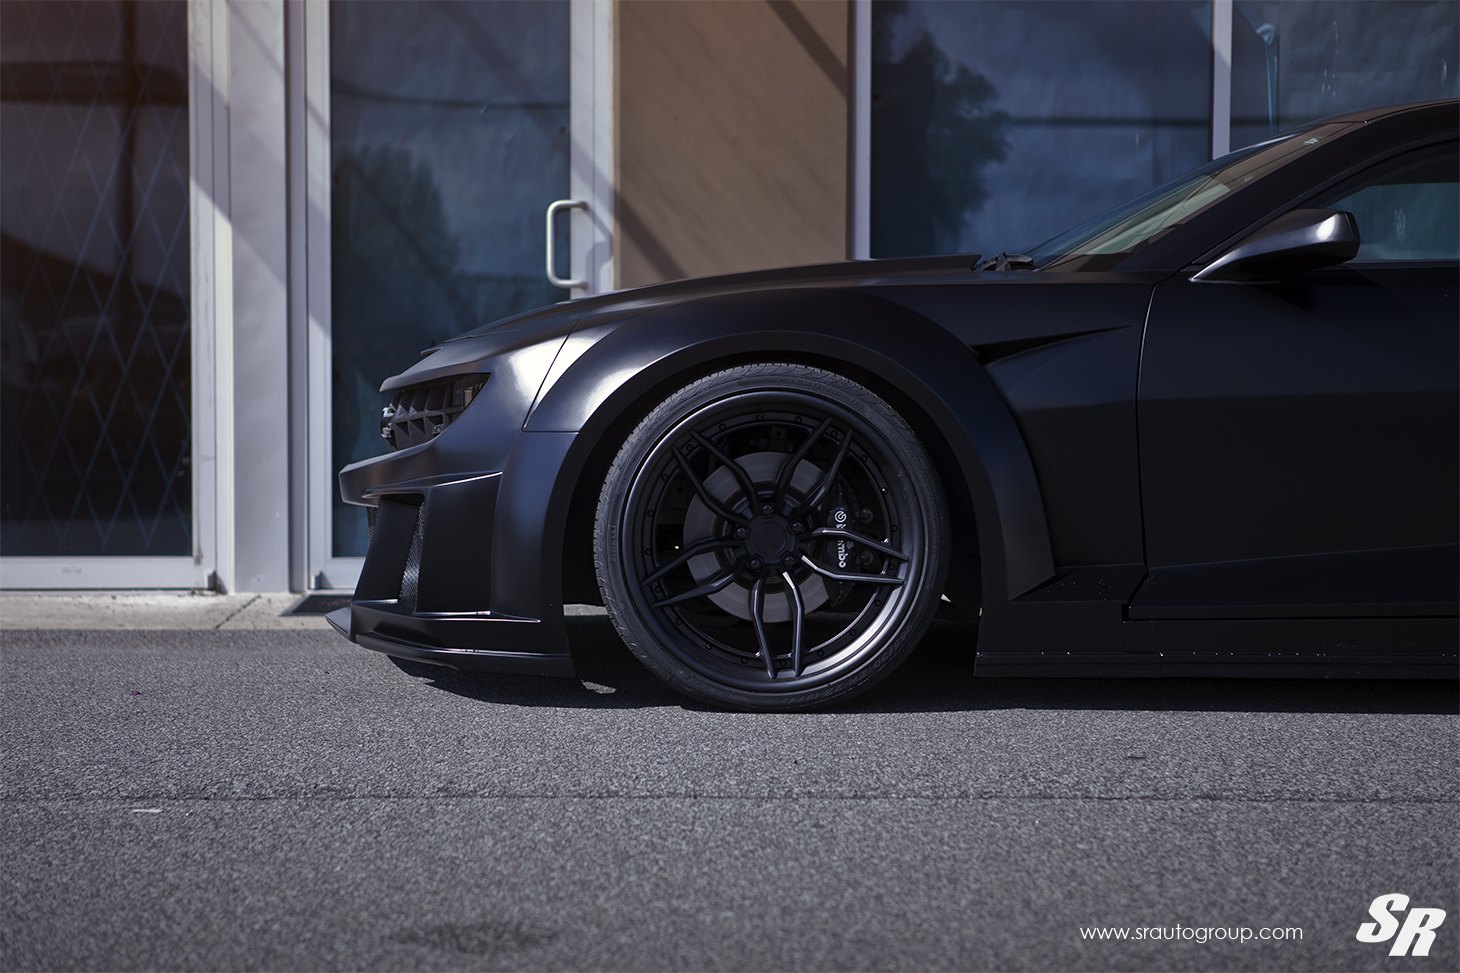 Aftermarket Rims with Brembo Brakes on Chevy Camaro - Photo by SR Auto Group